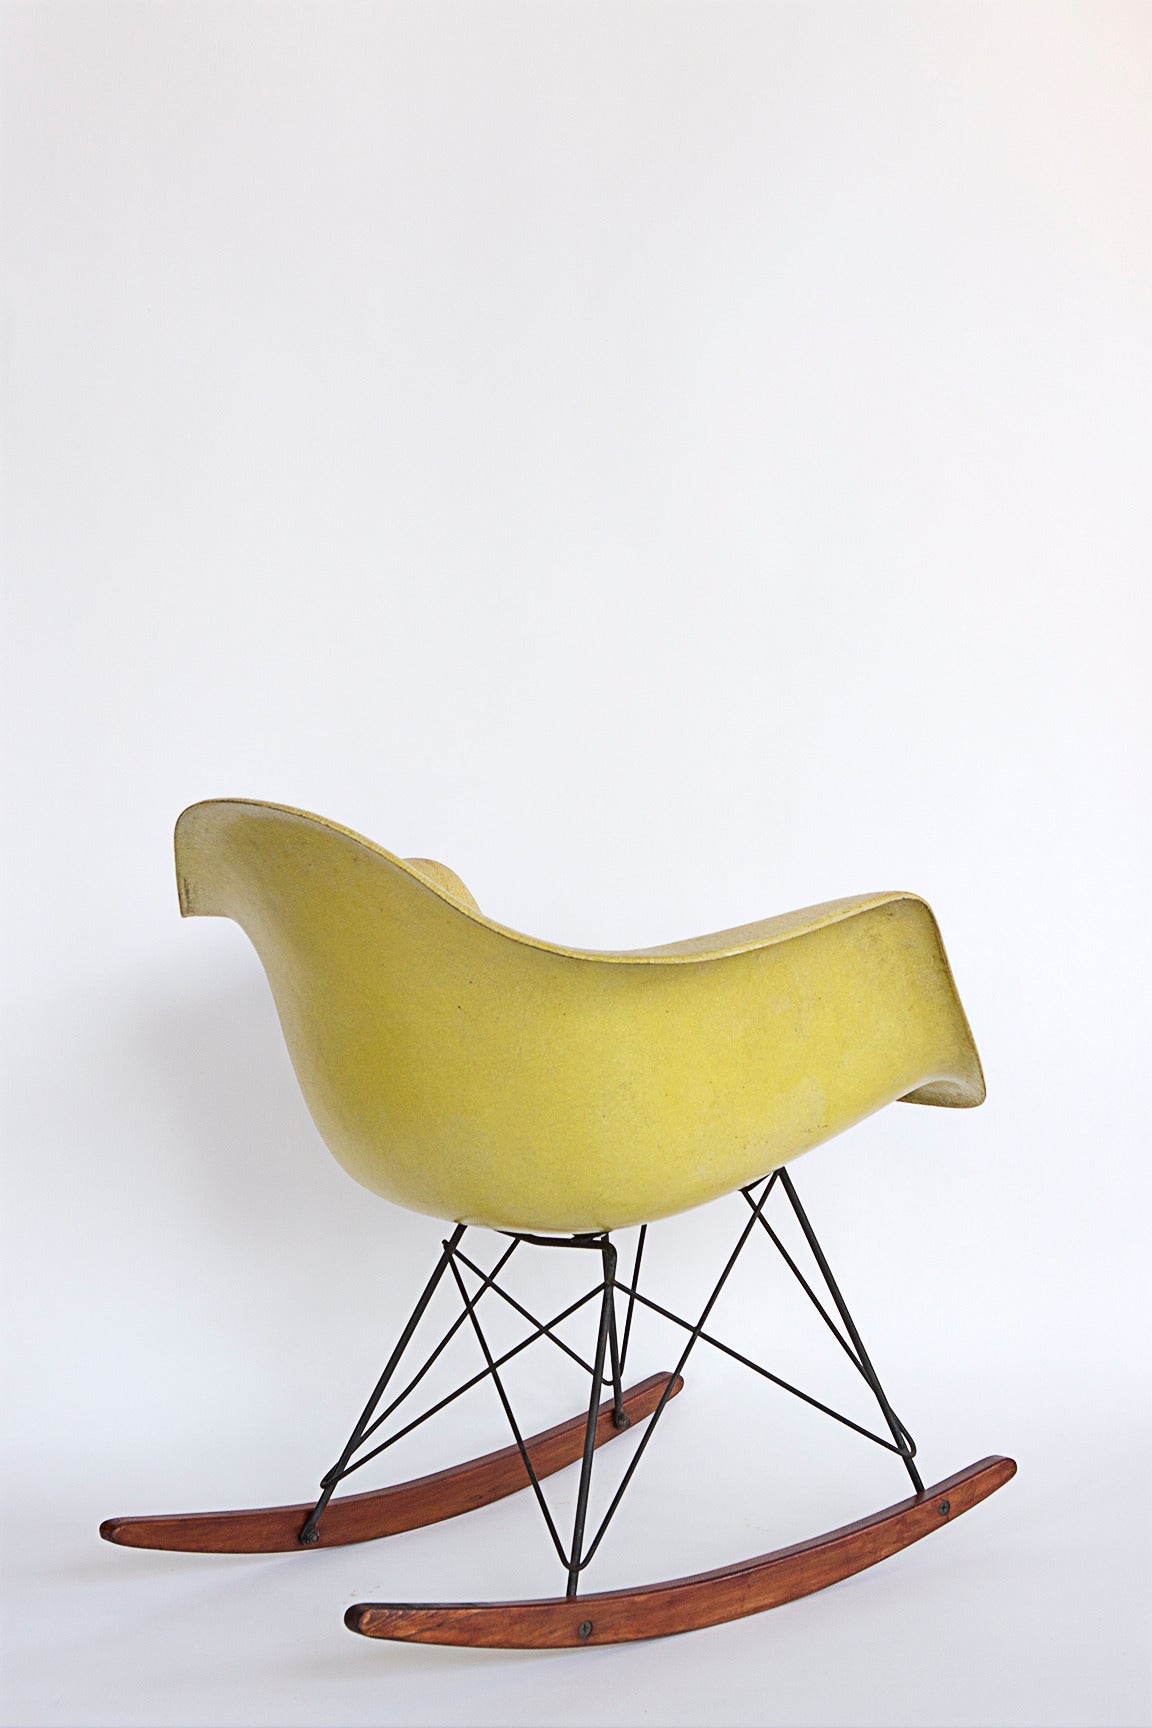 A classic to be had! Add a dashing pop of yellow to your space.

This would make a fantastic reading or occasional chair,

circa 1950, U.S.A.